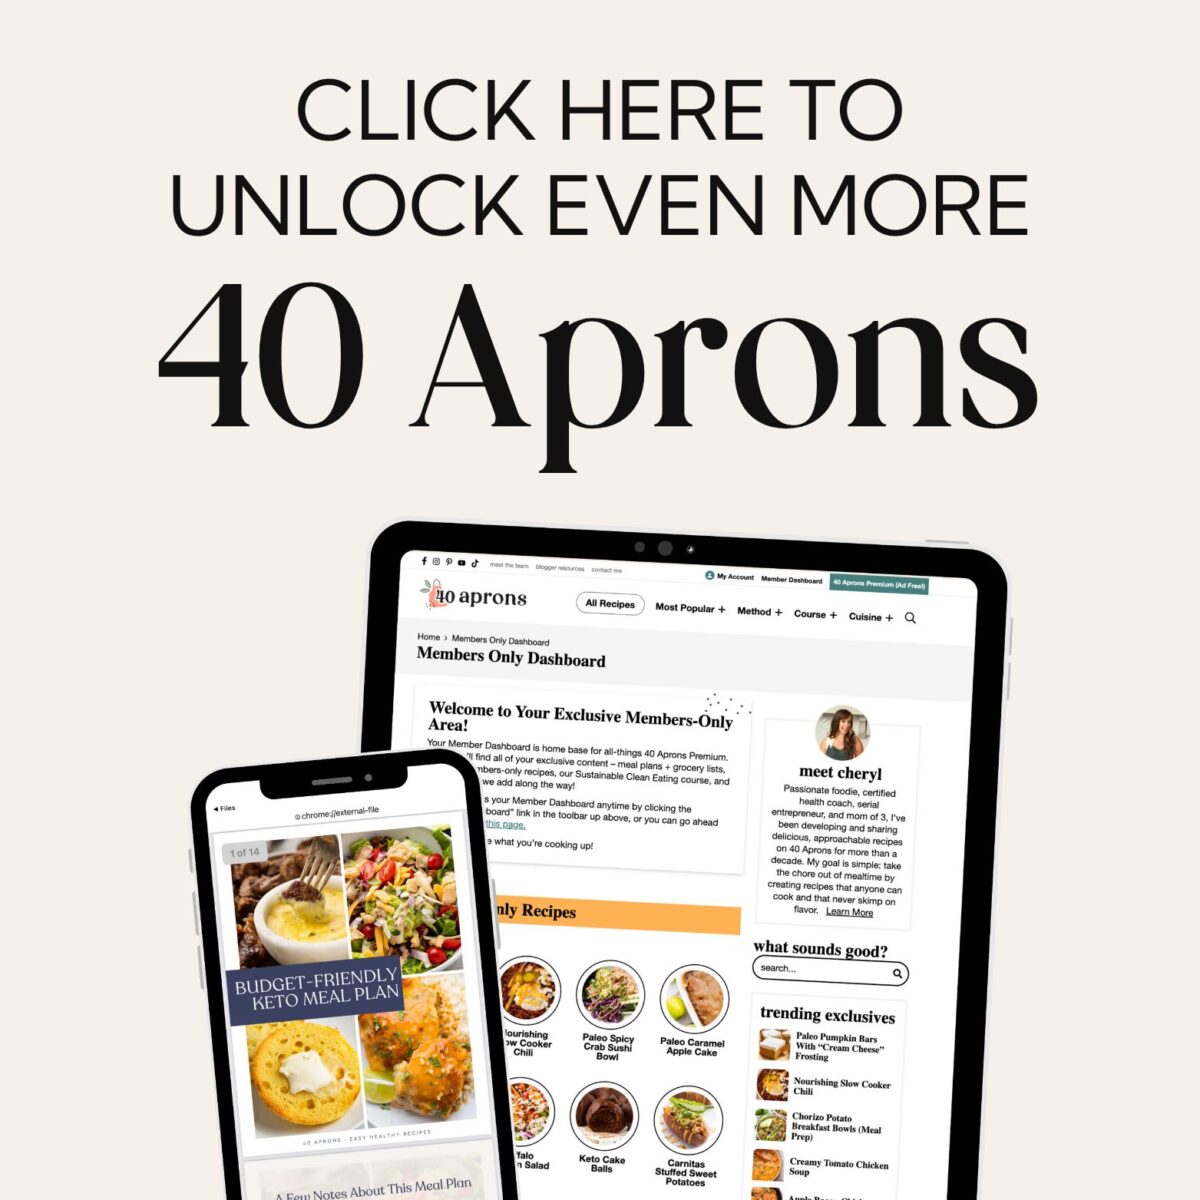 Click here to unlock even more 40 Aprons.